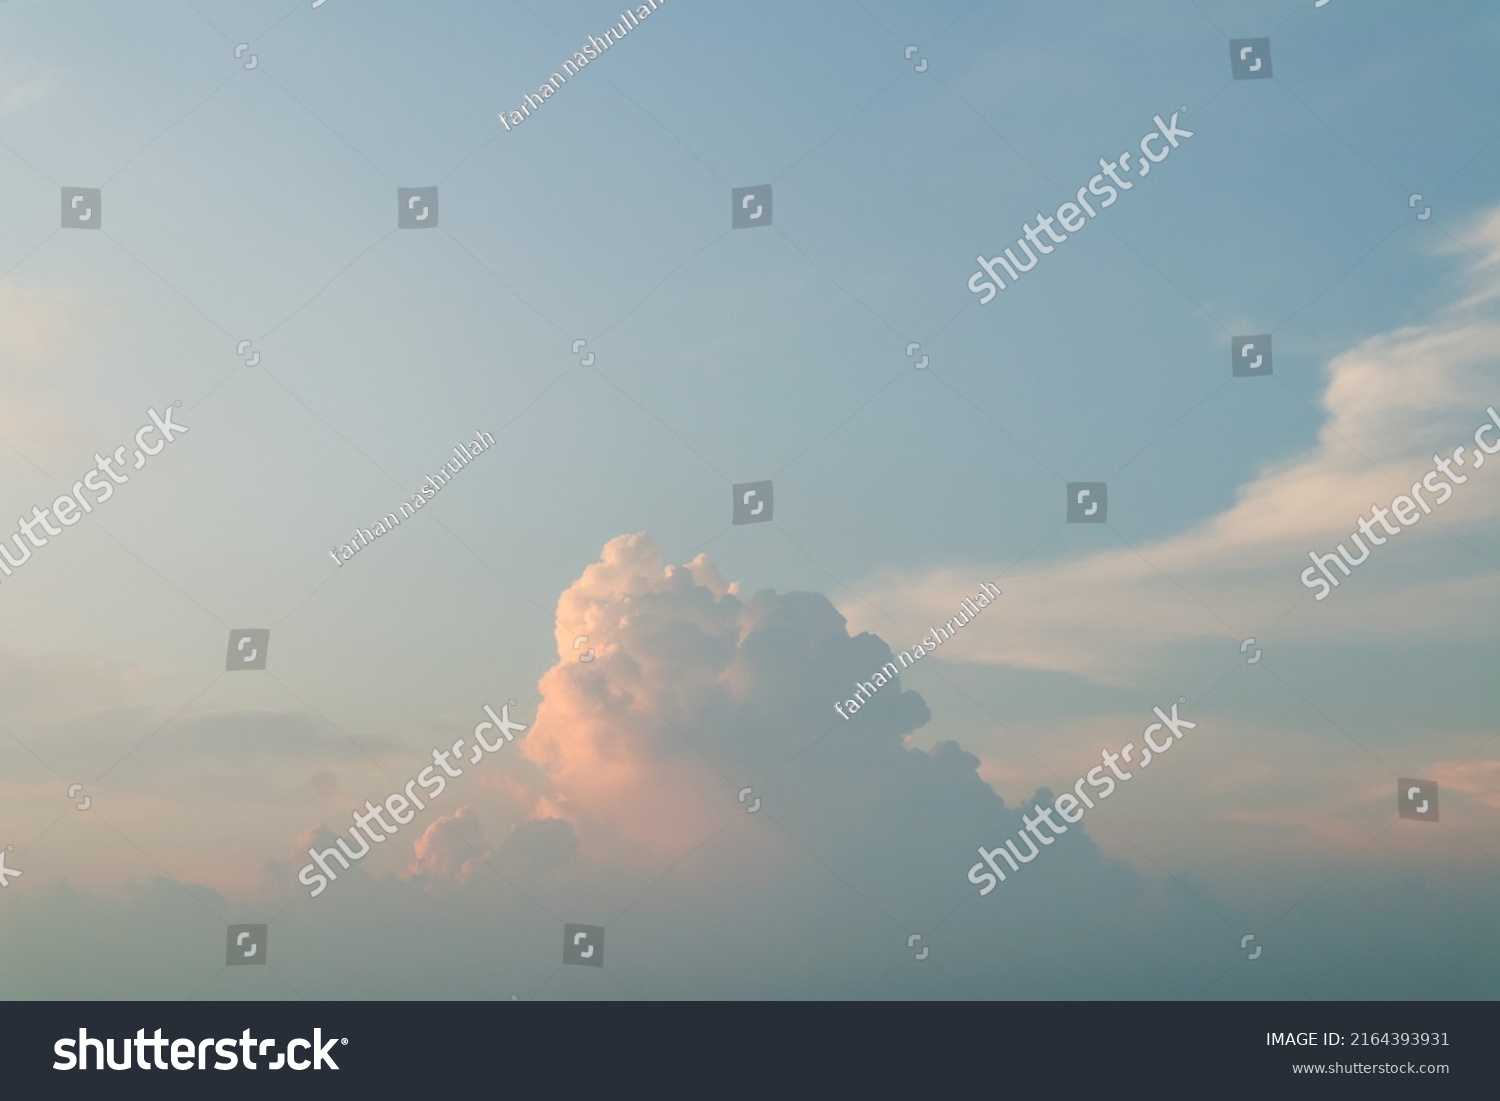 the sky is blue with reddish clouds at sunset
 #2164393931